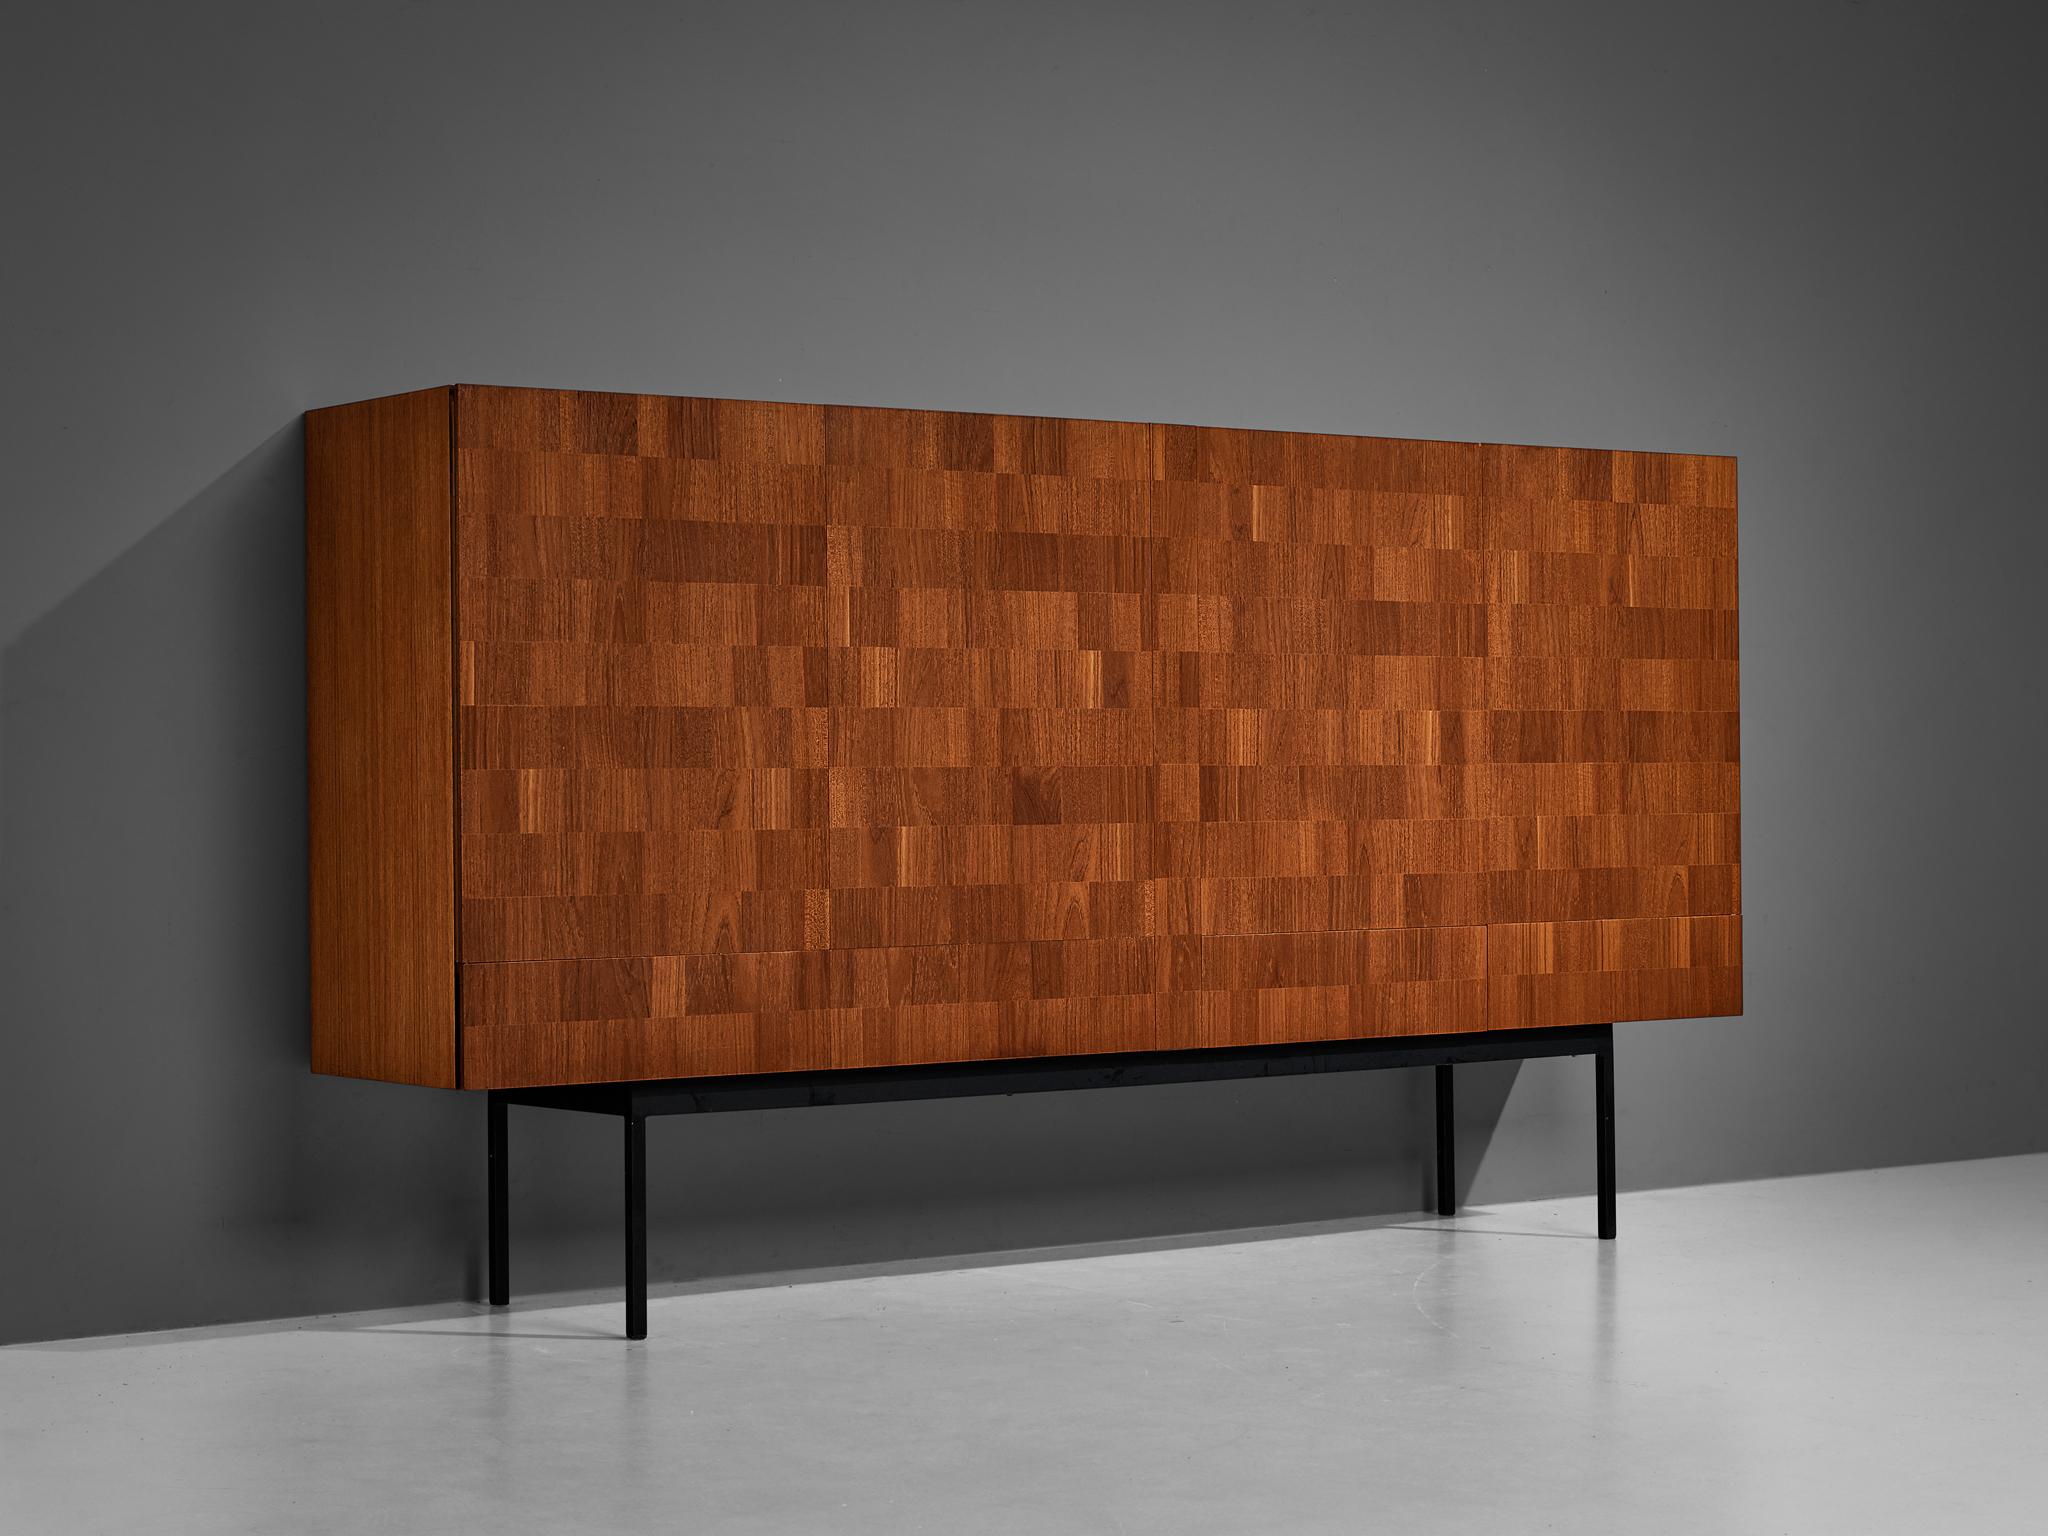 Dieter Waeckerlin for Behr, sideboard, teak, metal, maple, Switzerland, 1950s.

This distinctive sideboard holds an utterly well-balanced construction embracing a great sense of proportions. The whole design is based on an elongated body executed in